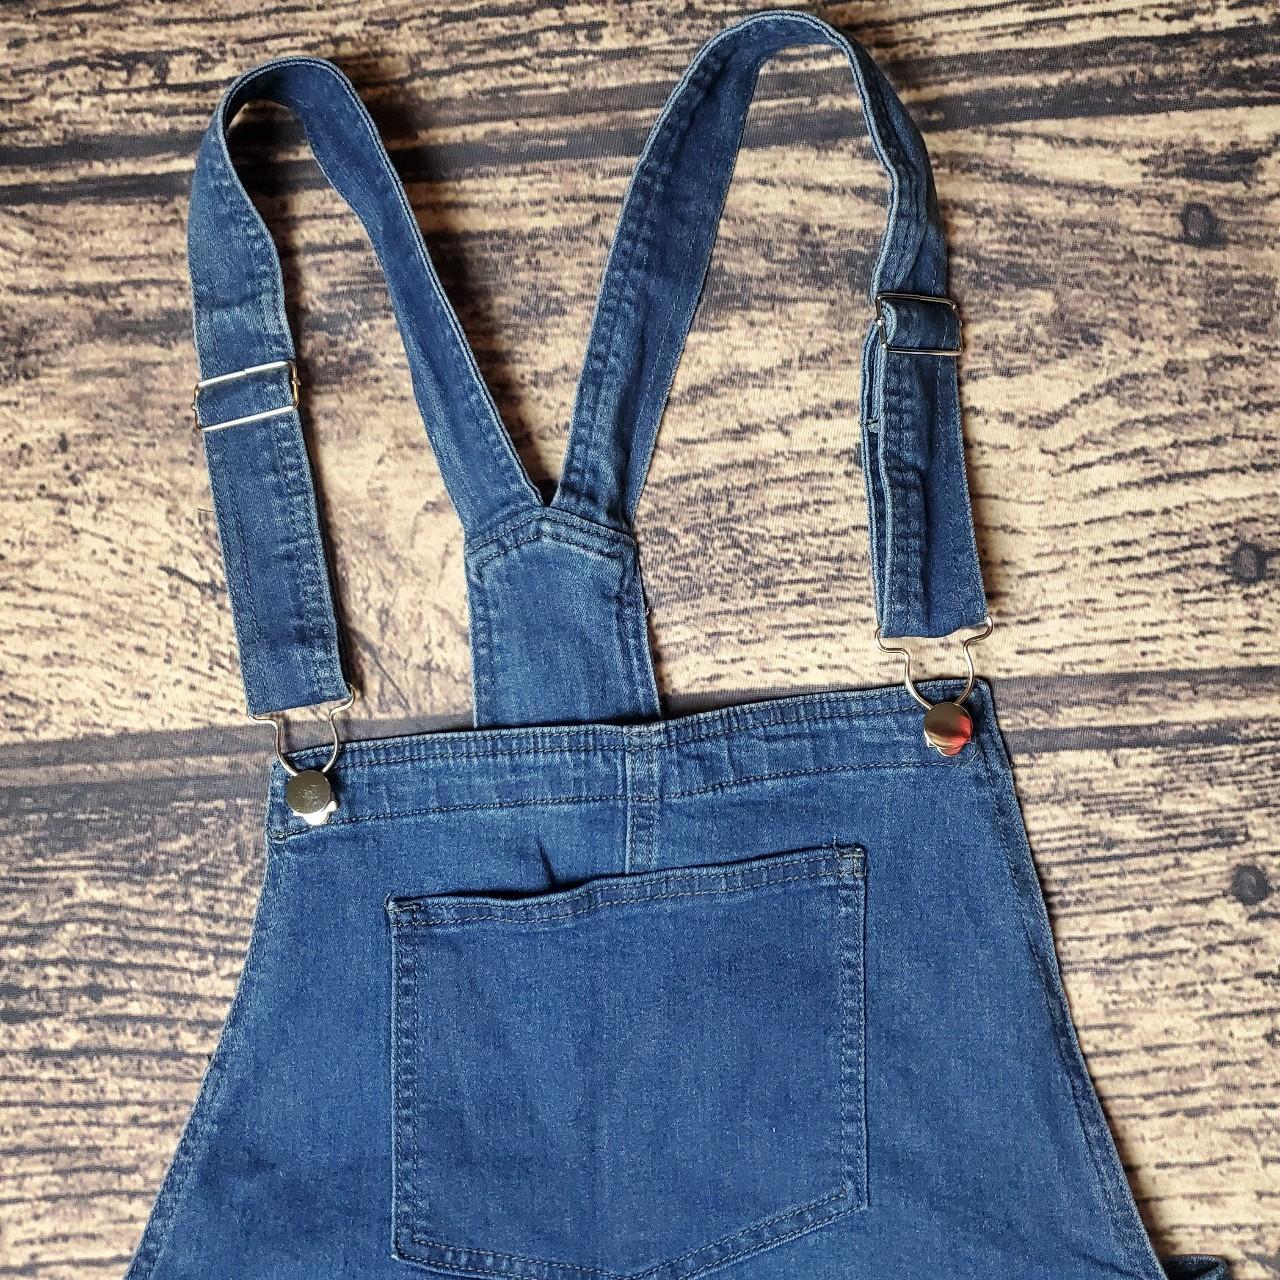 Product Image 4 - Denim Overall Shorts.
Size Large
The measurements